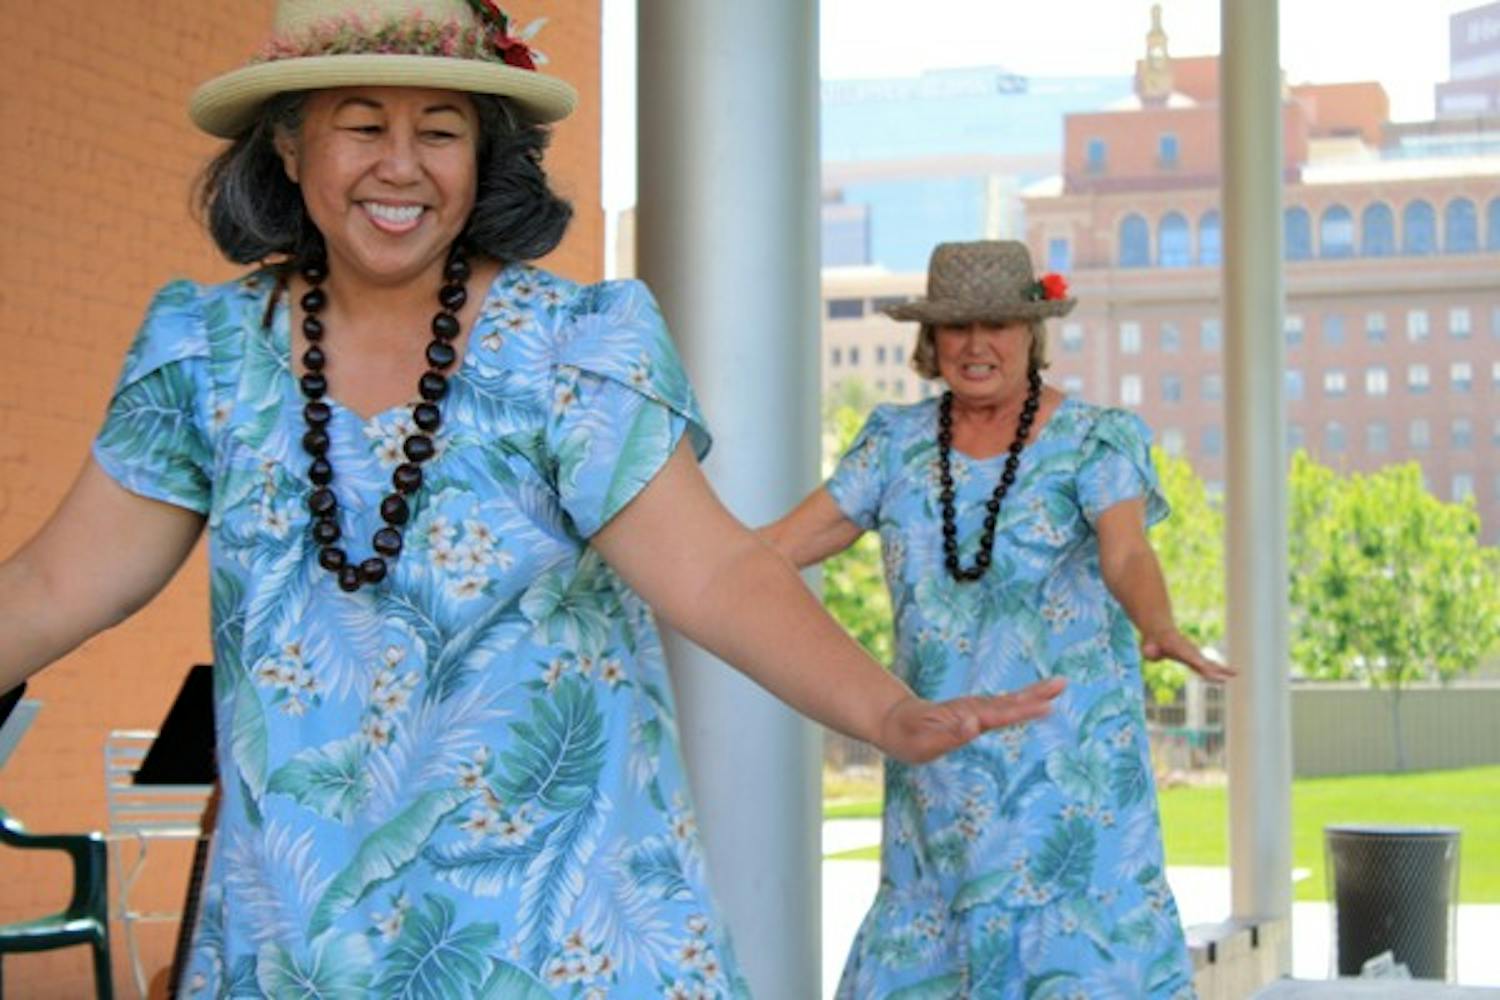 Tropical Breeze, a Hawaiian musical and dance group, performed in downtown Phoenix Tuesday afternoon as part of the Civic Space Lunchtime Concert Series, which includes free live music and food trucks. (Photo by Jessie Wardarski)